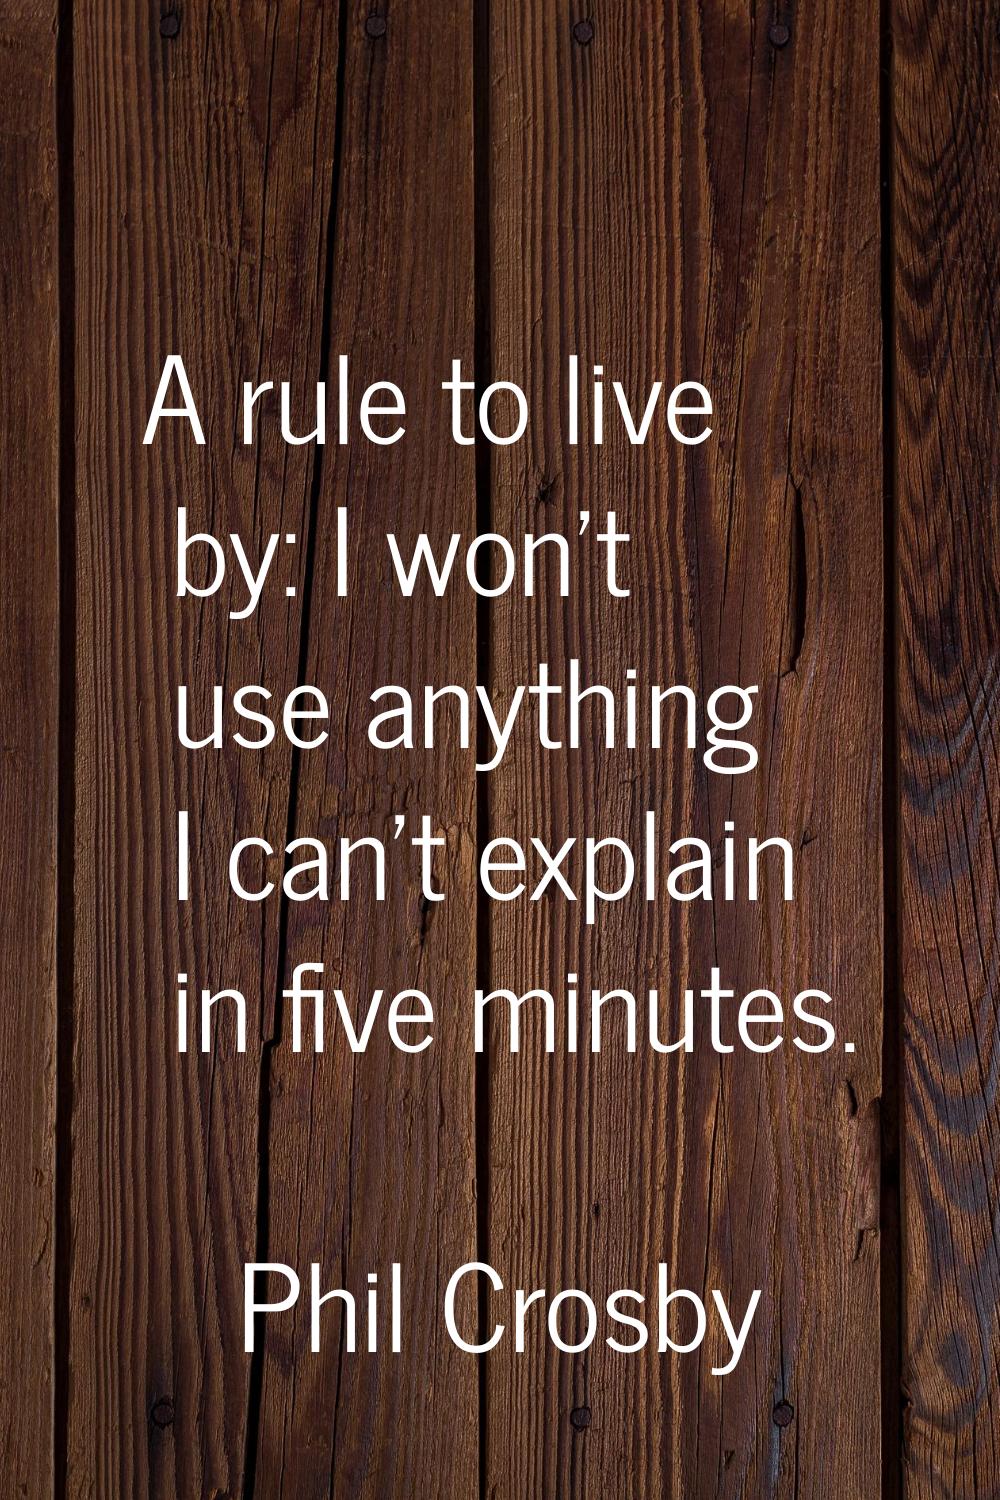 A rule to live by: I won't use anything I can't explain in five minutes.